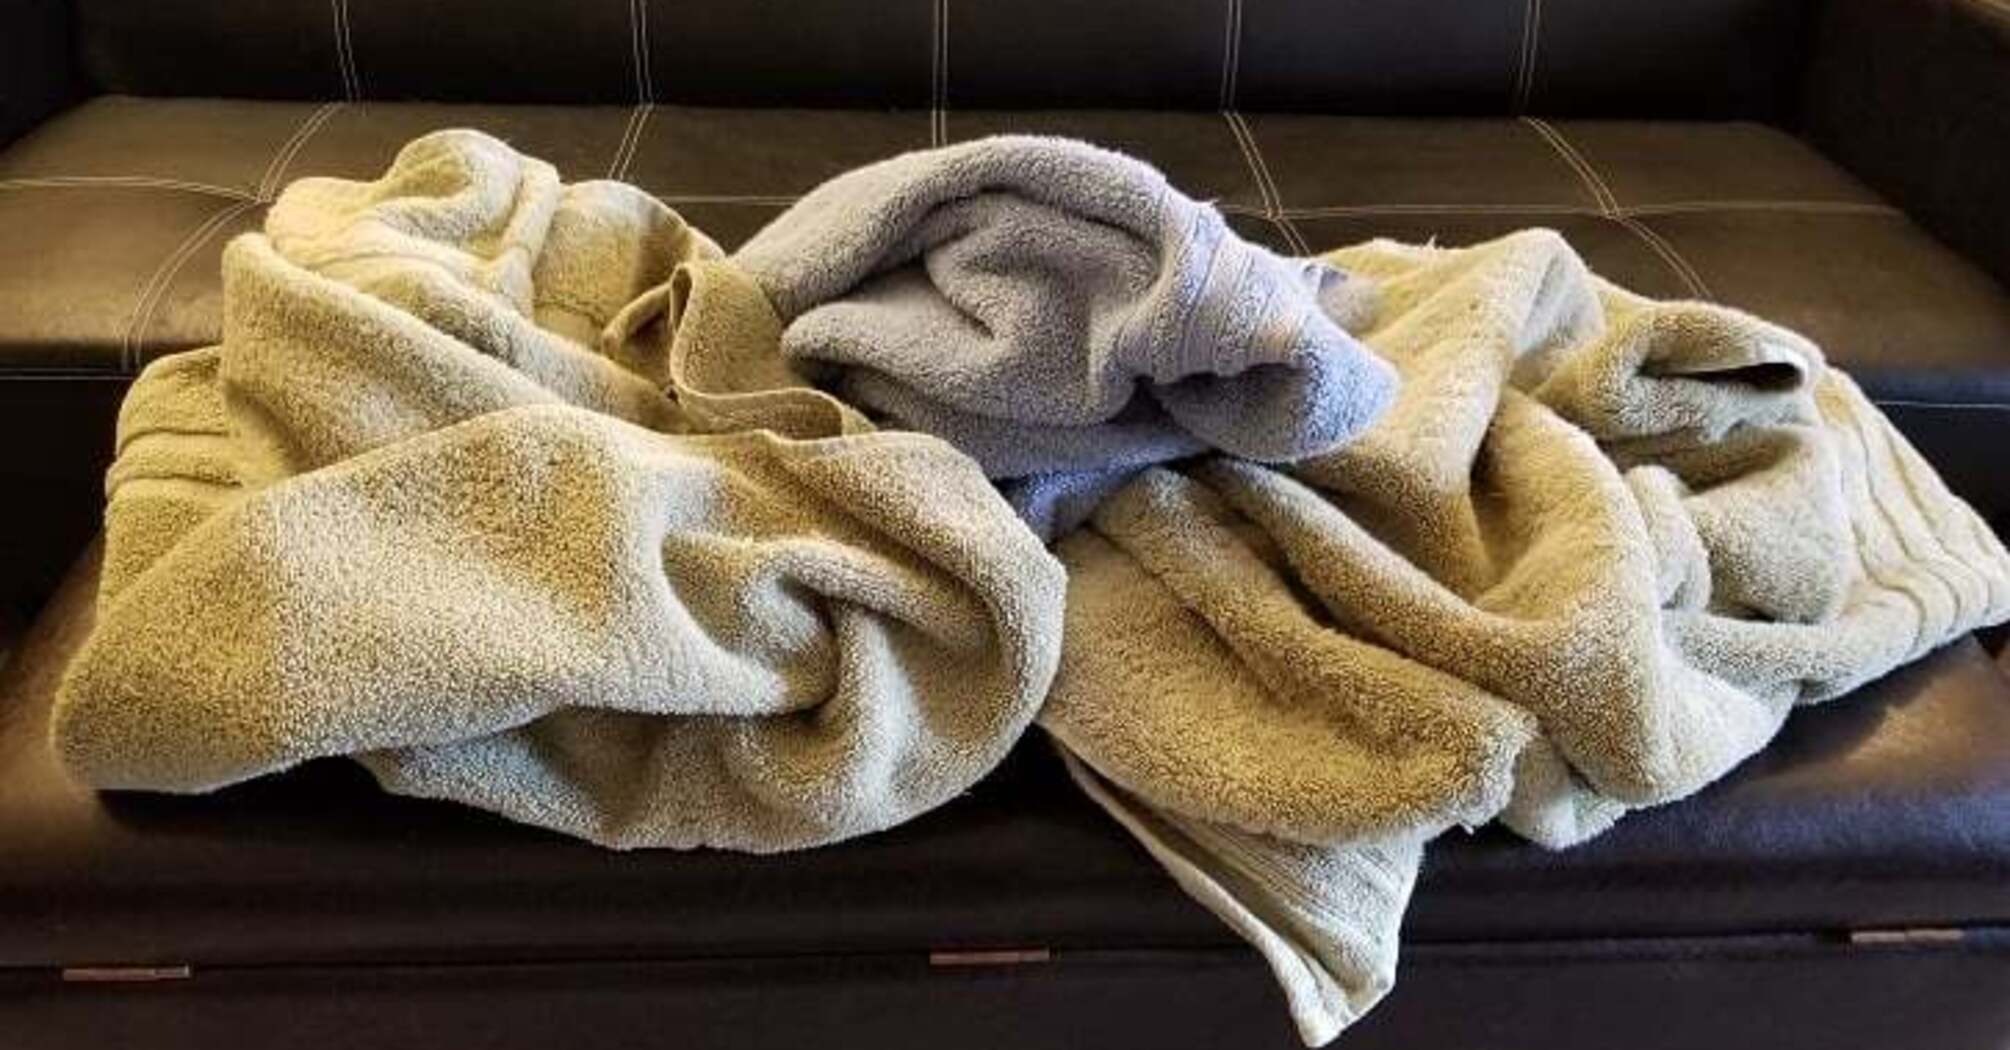 Don't throw away old towels